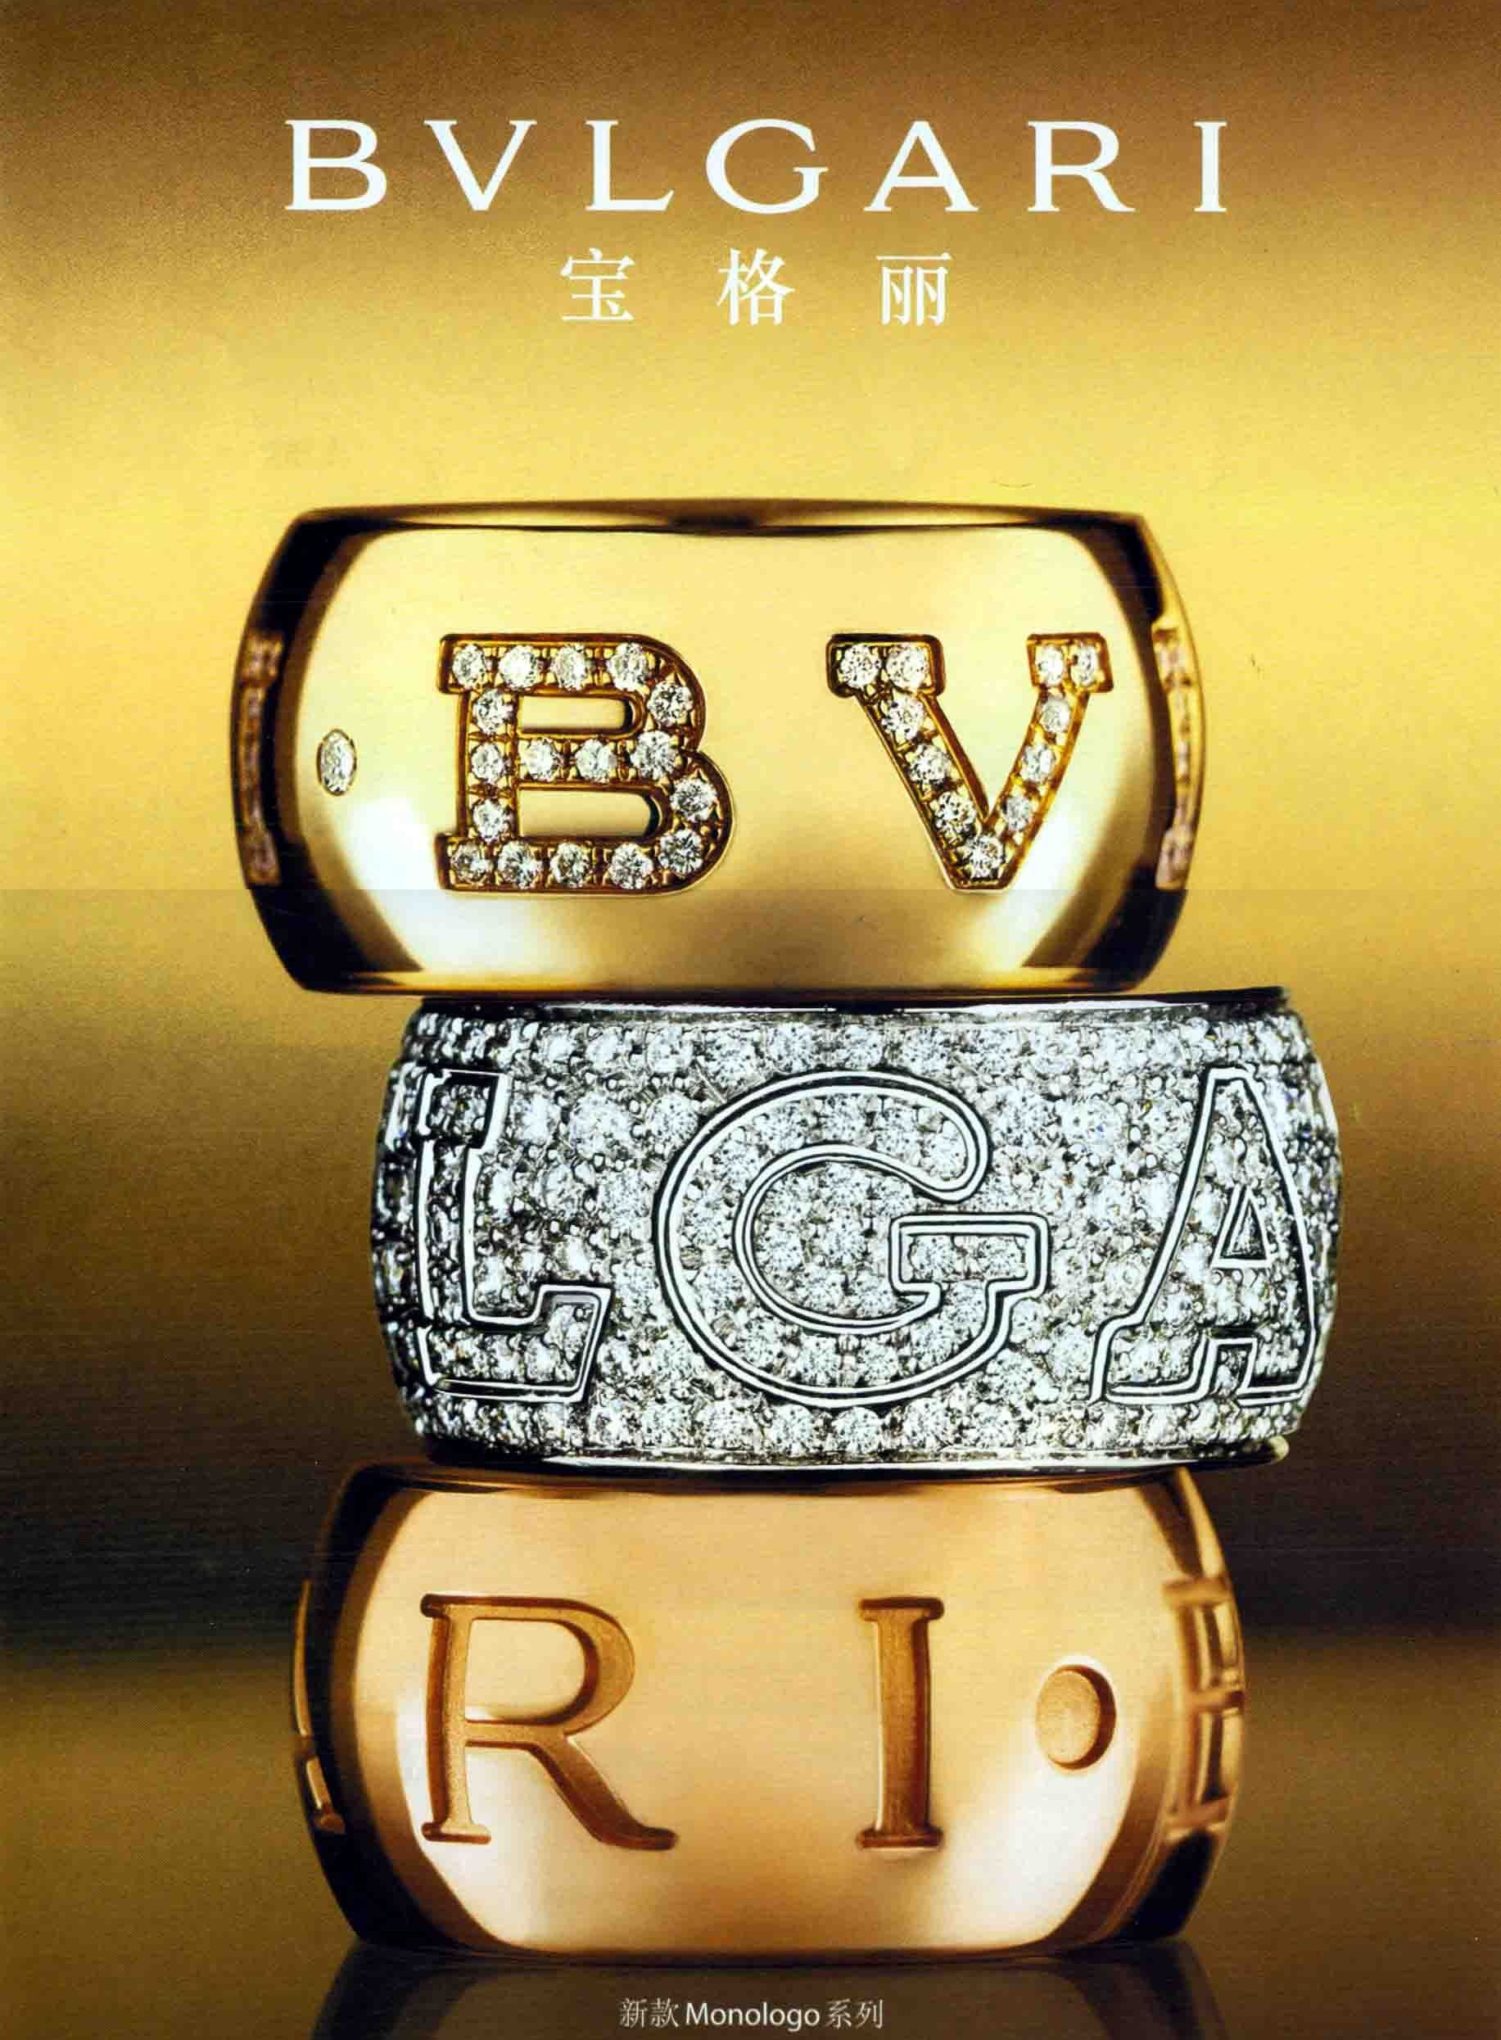 Bvlgari: The Success of Fragrance Customization in China